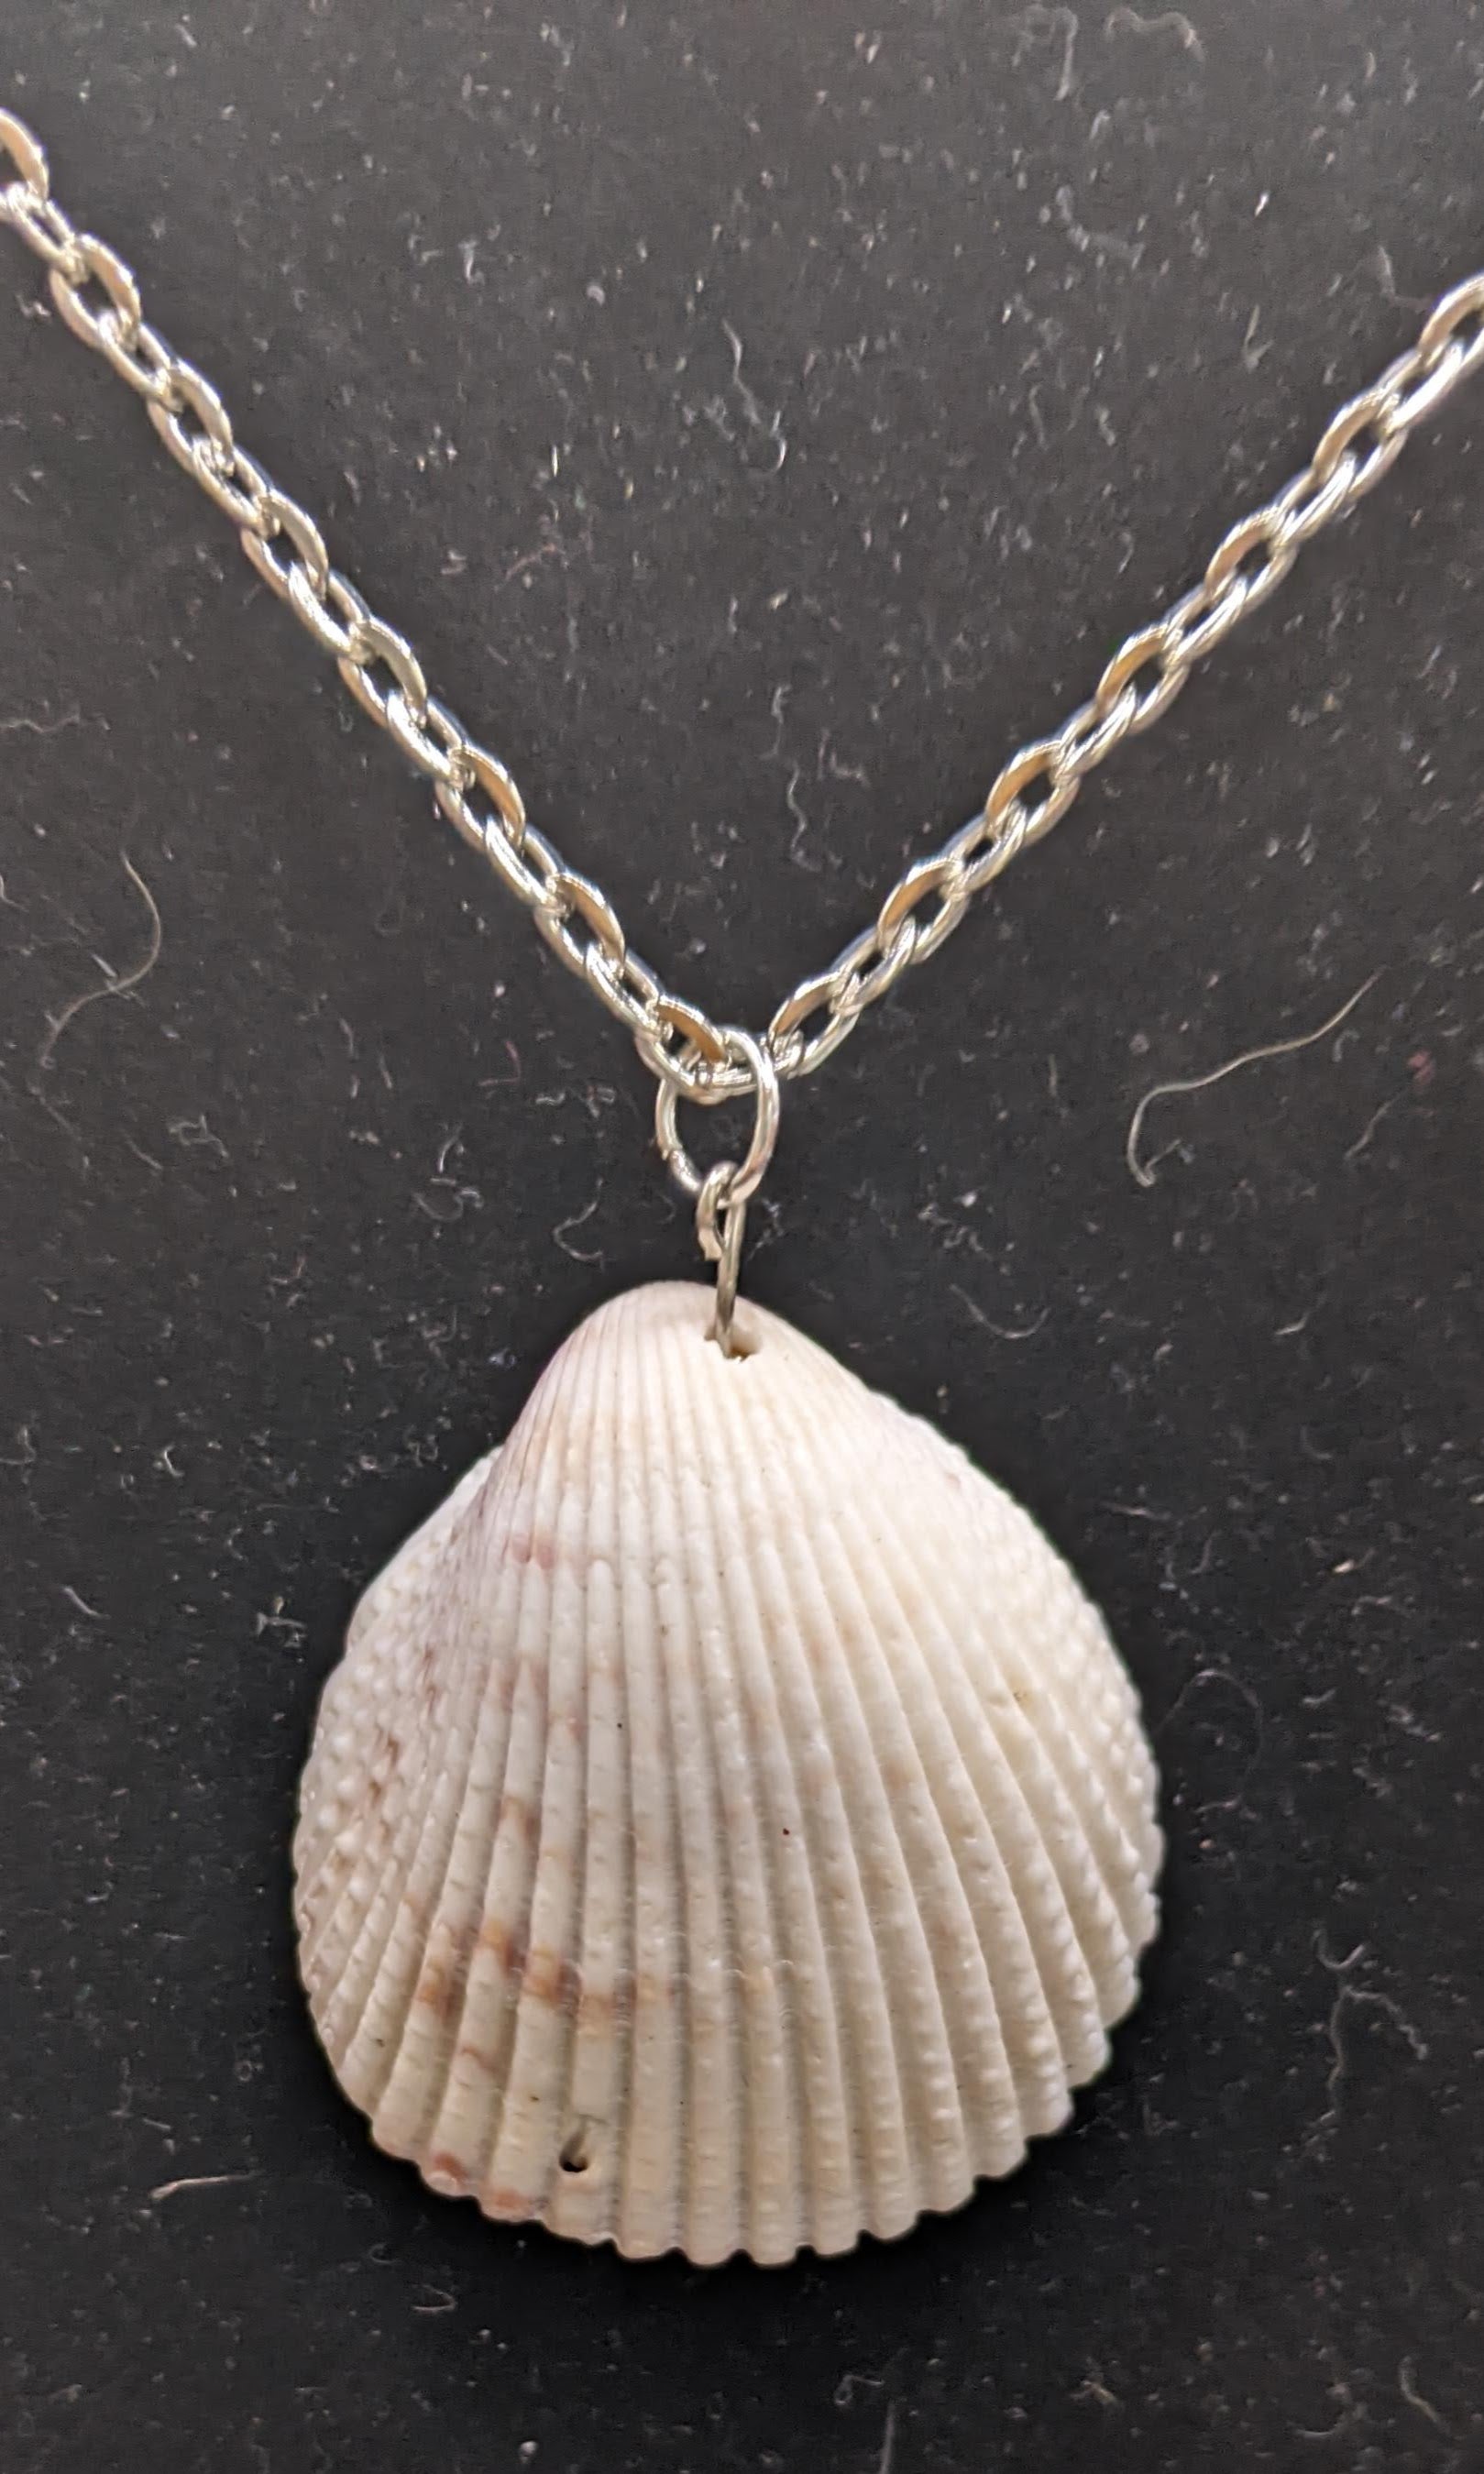 Prickly Cockle Shell  and seaglass necklace #1